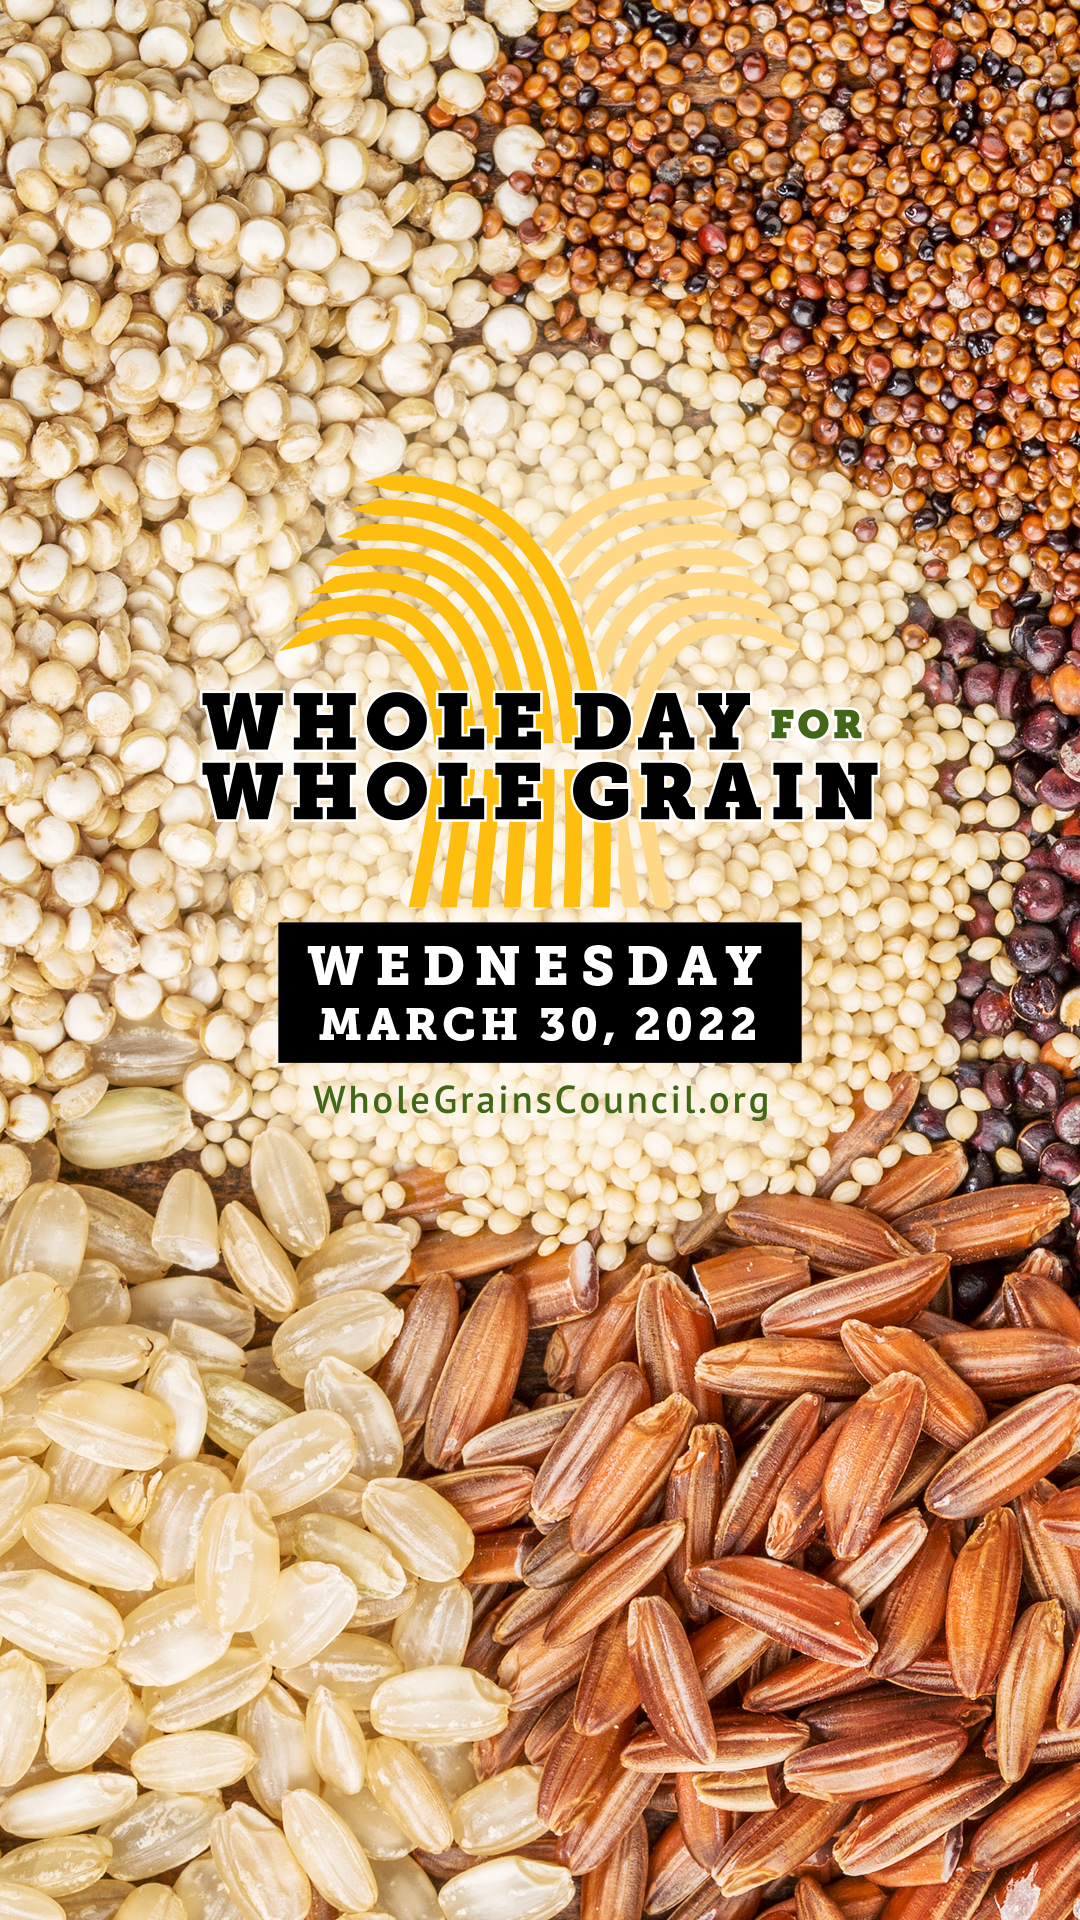 Whole Day for Whole Grain Logo